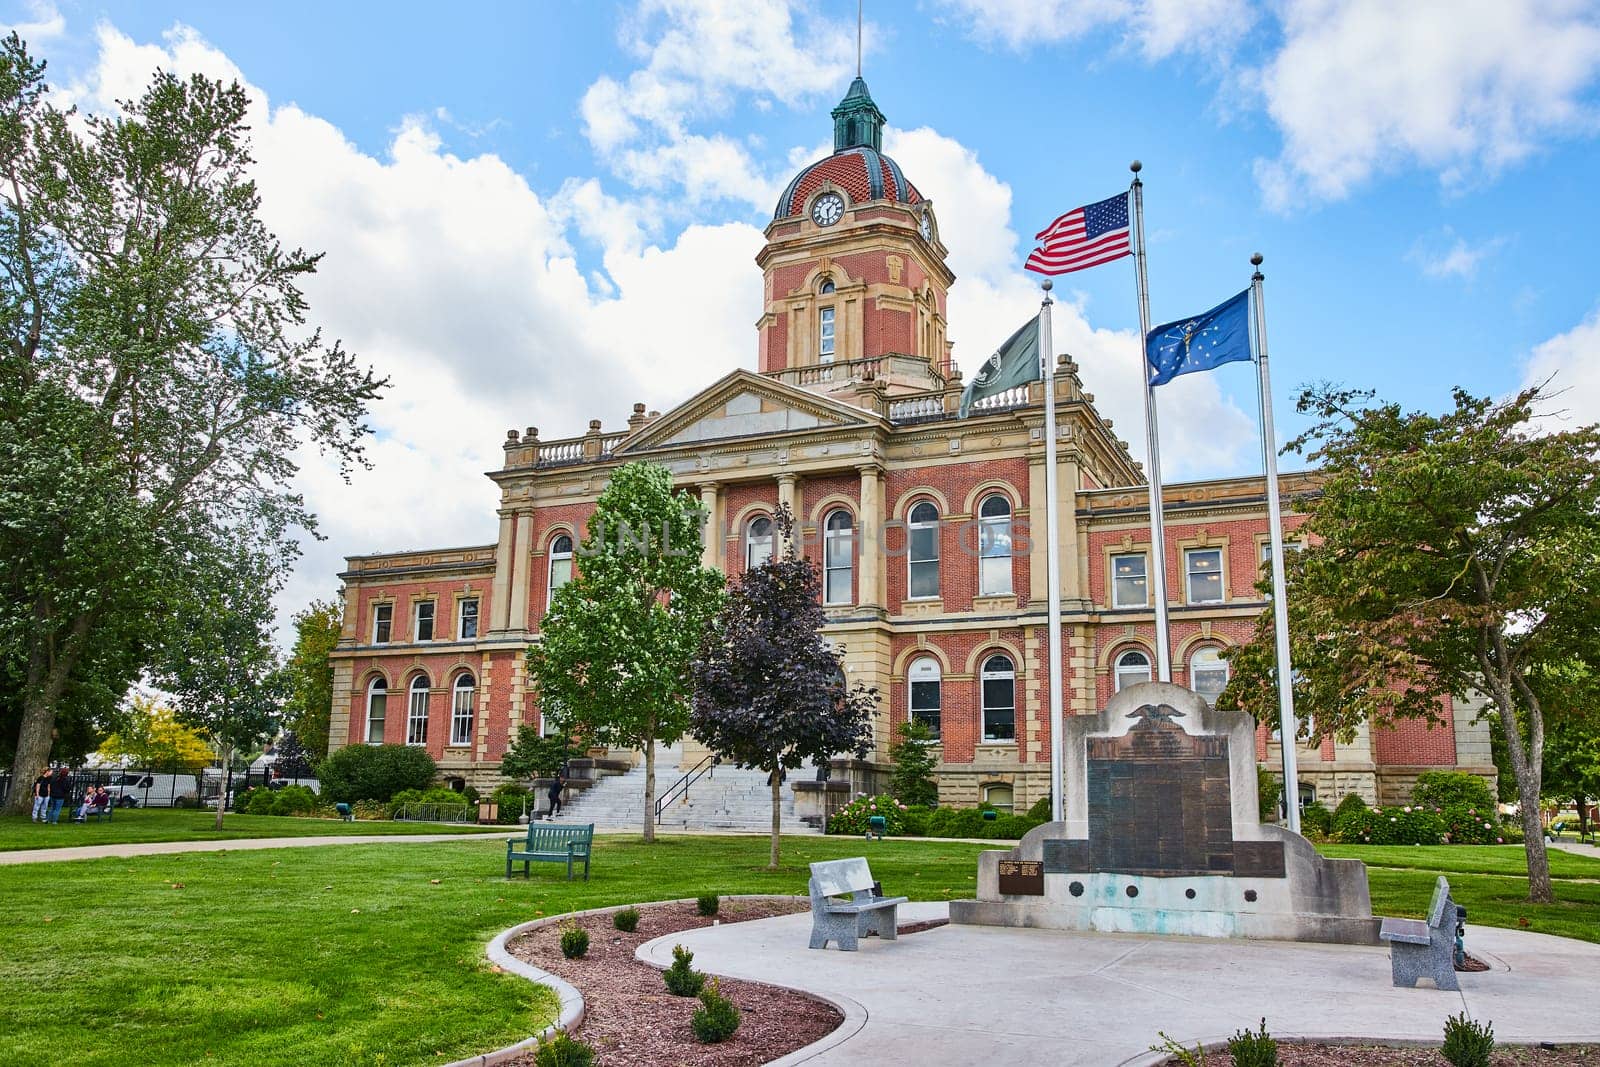 Elkhart County courthouse under cloudy blue sky and memorial with flags, law and order, Indiana by njproductions